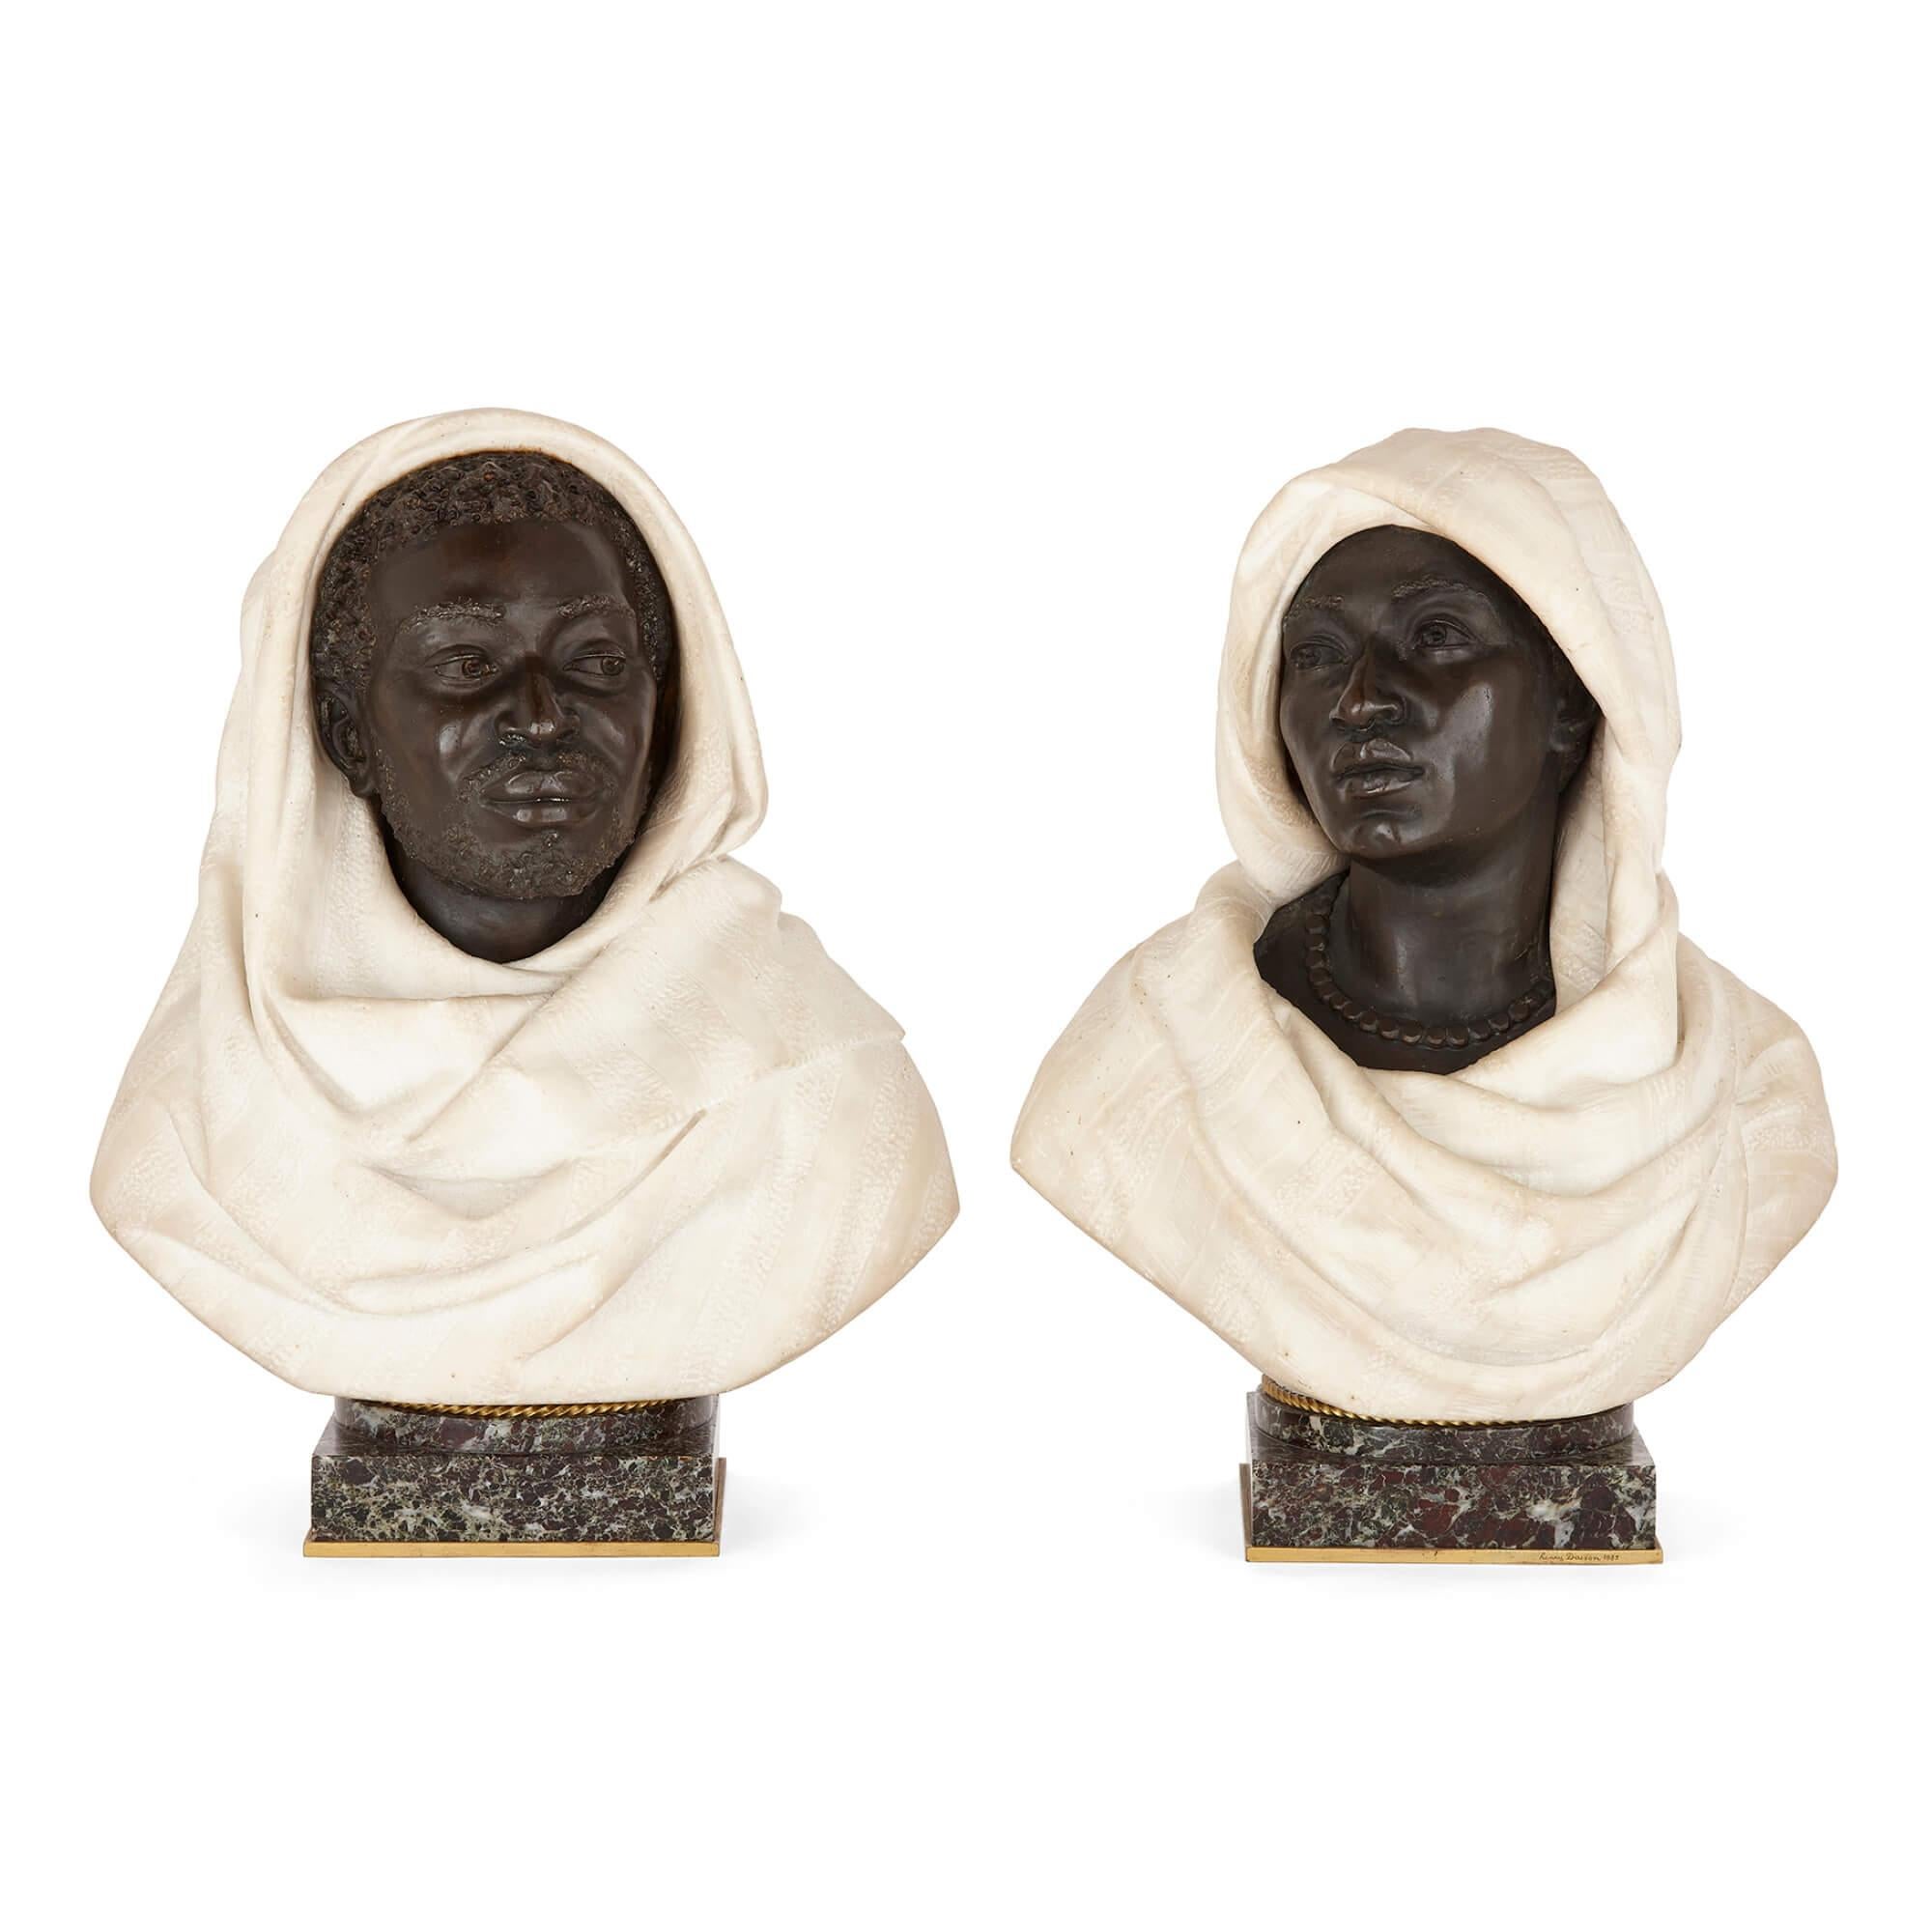 Pair of bronze and marble busts of a North African man and woman
by C. Caccia, Italian, 1883, the base by H. Dasson, 1885
Measures: Height 44cm, width 35cm, depth 21cm

Provenance: from the collection of the late Sir Arthur Gilbert

This